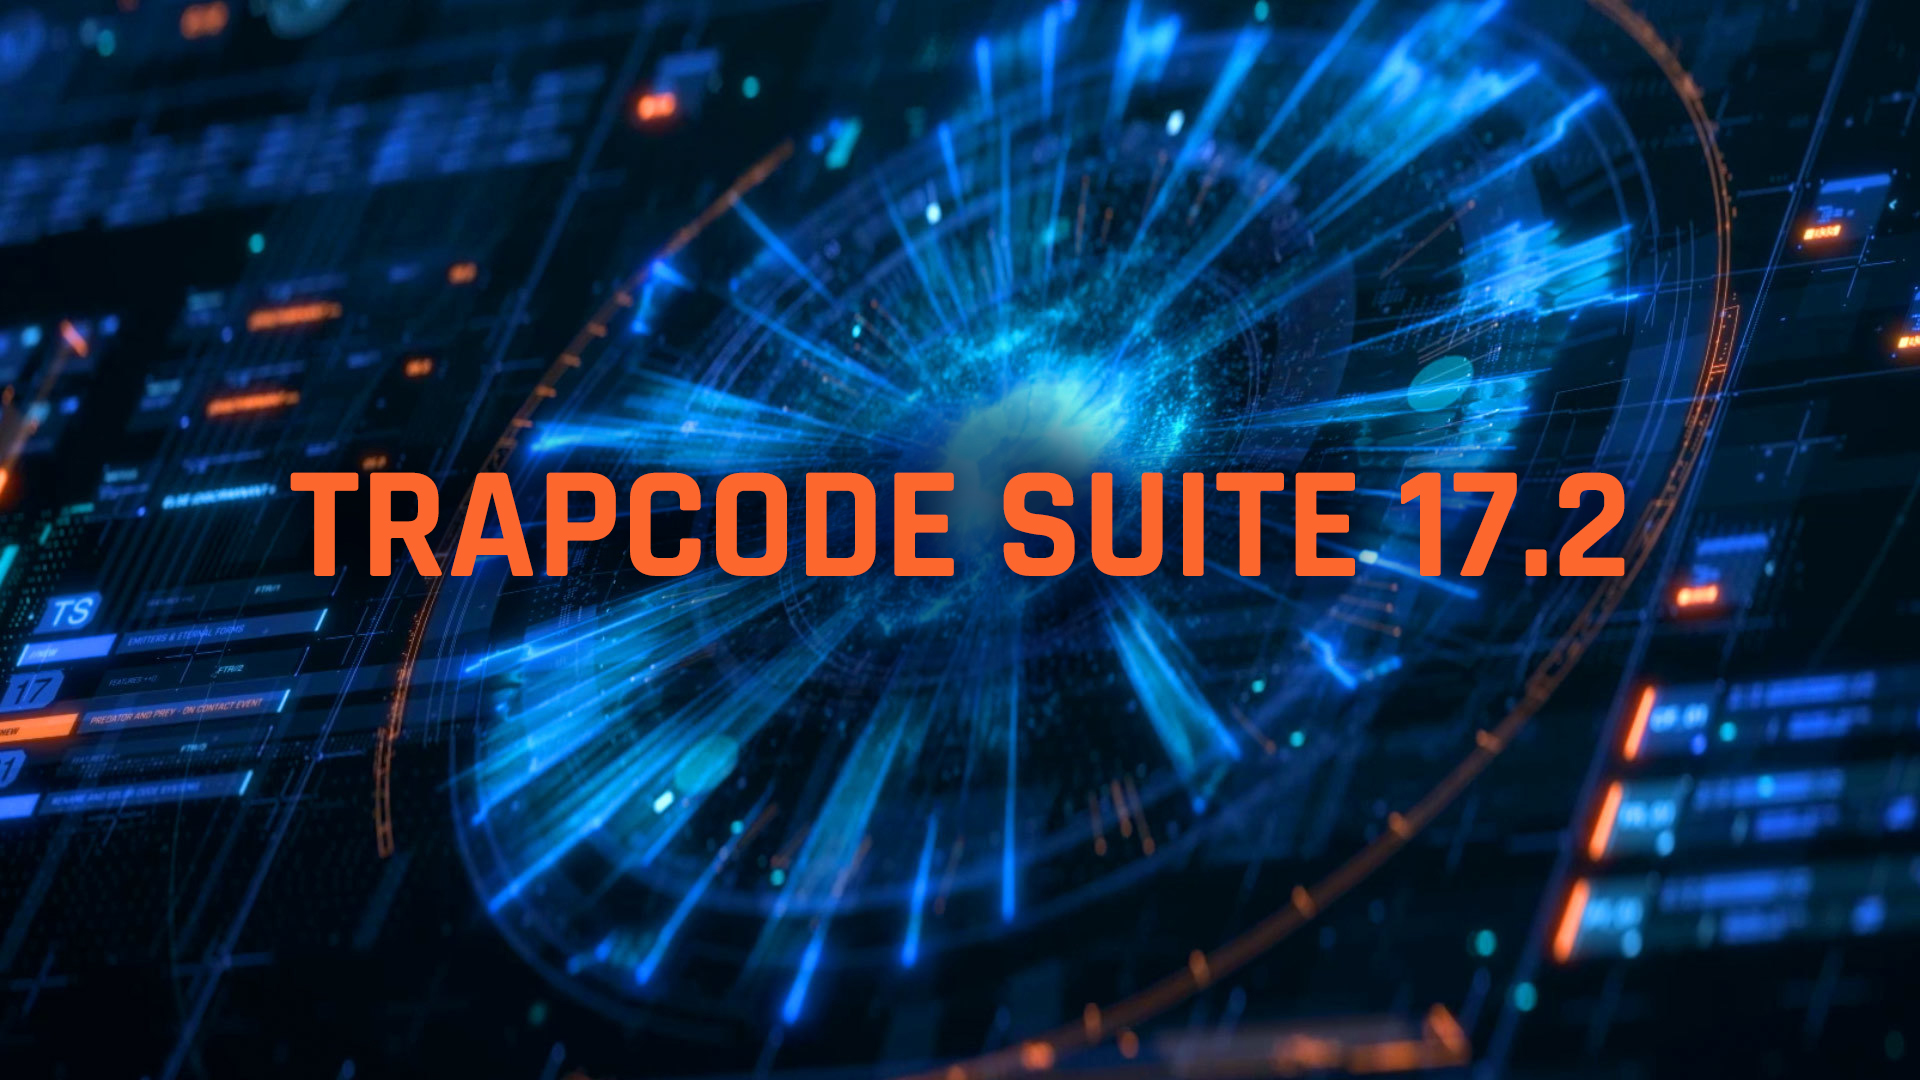 Red Giant Trapcode Suite 15.1.3 Win x64 | GFXDomain Blog